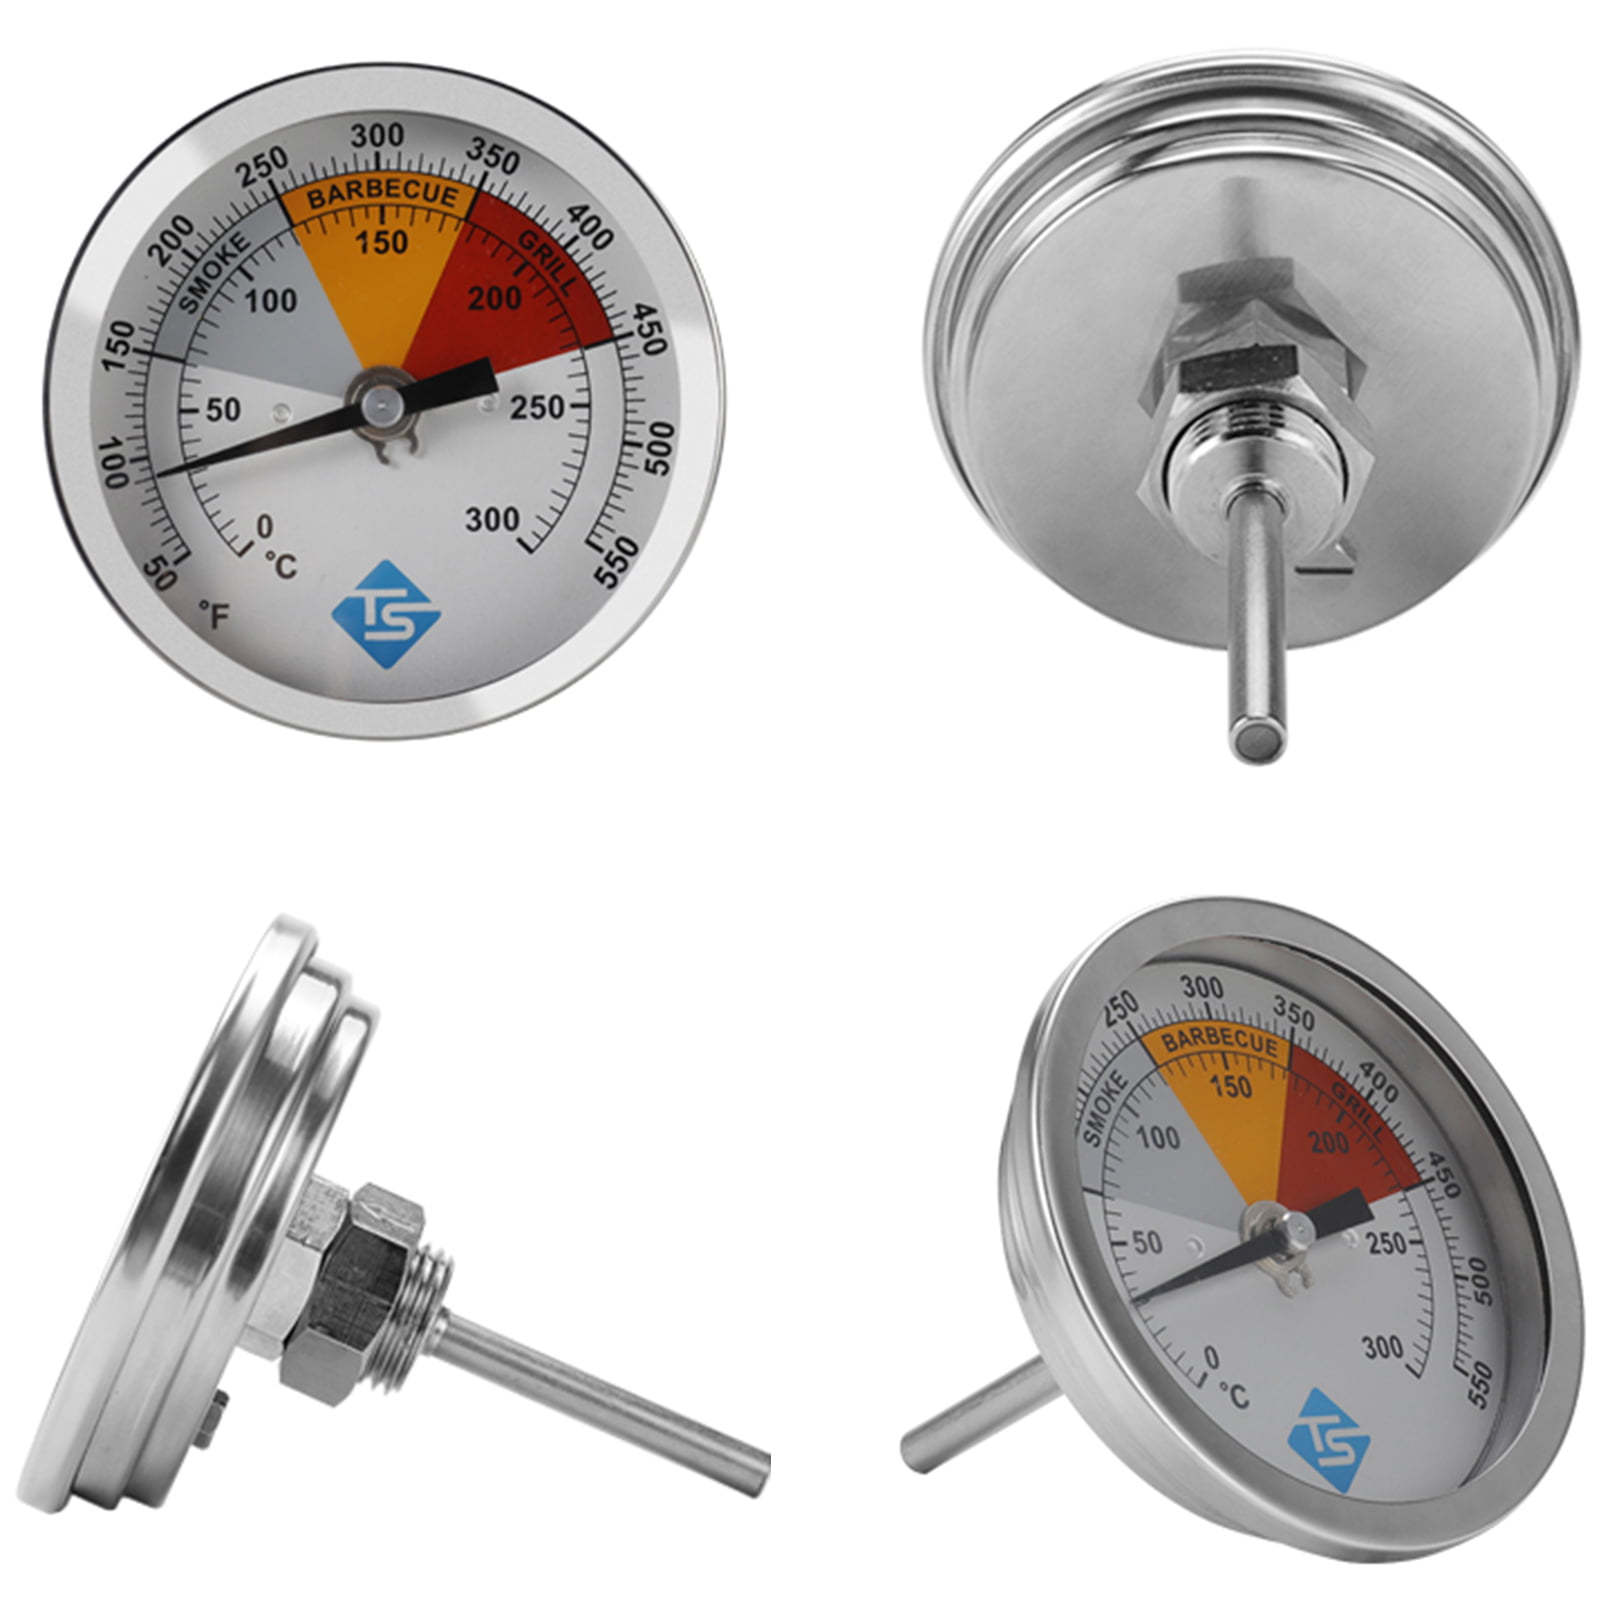 Barbecue BBQ Smoker Grill Thermometer Temperature Gauge 0-300℃ Stainless Steel 